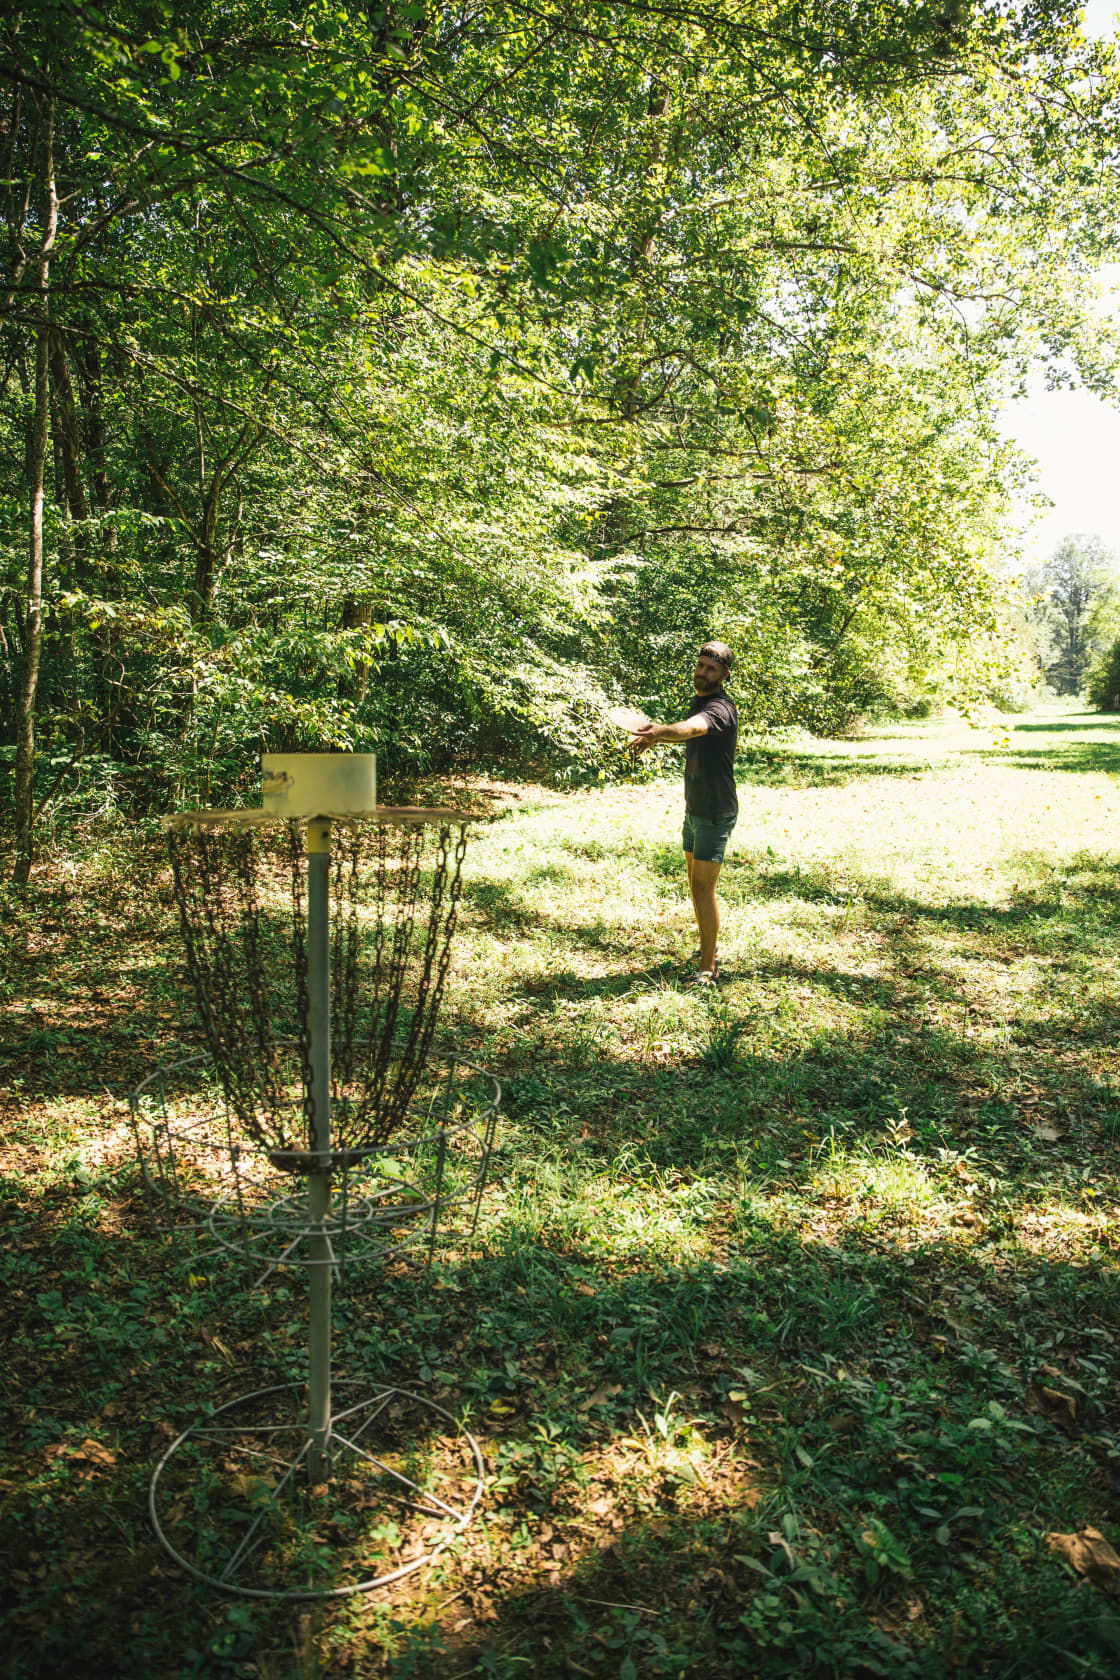 Disc golf along the field next to the trout stream